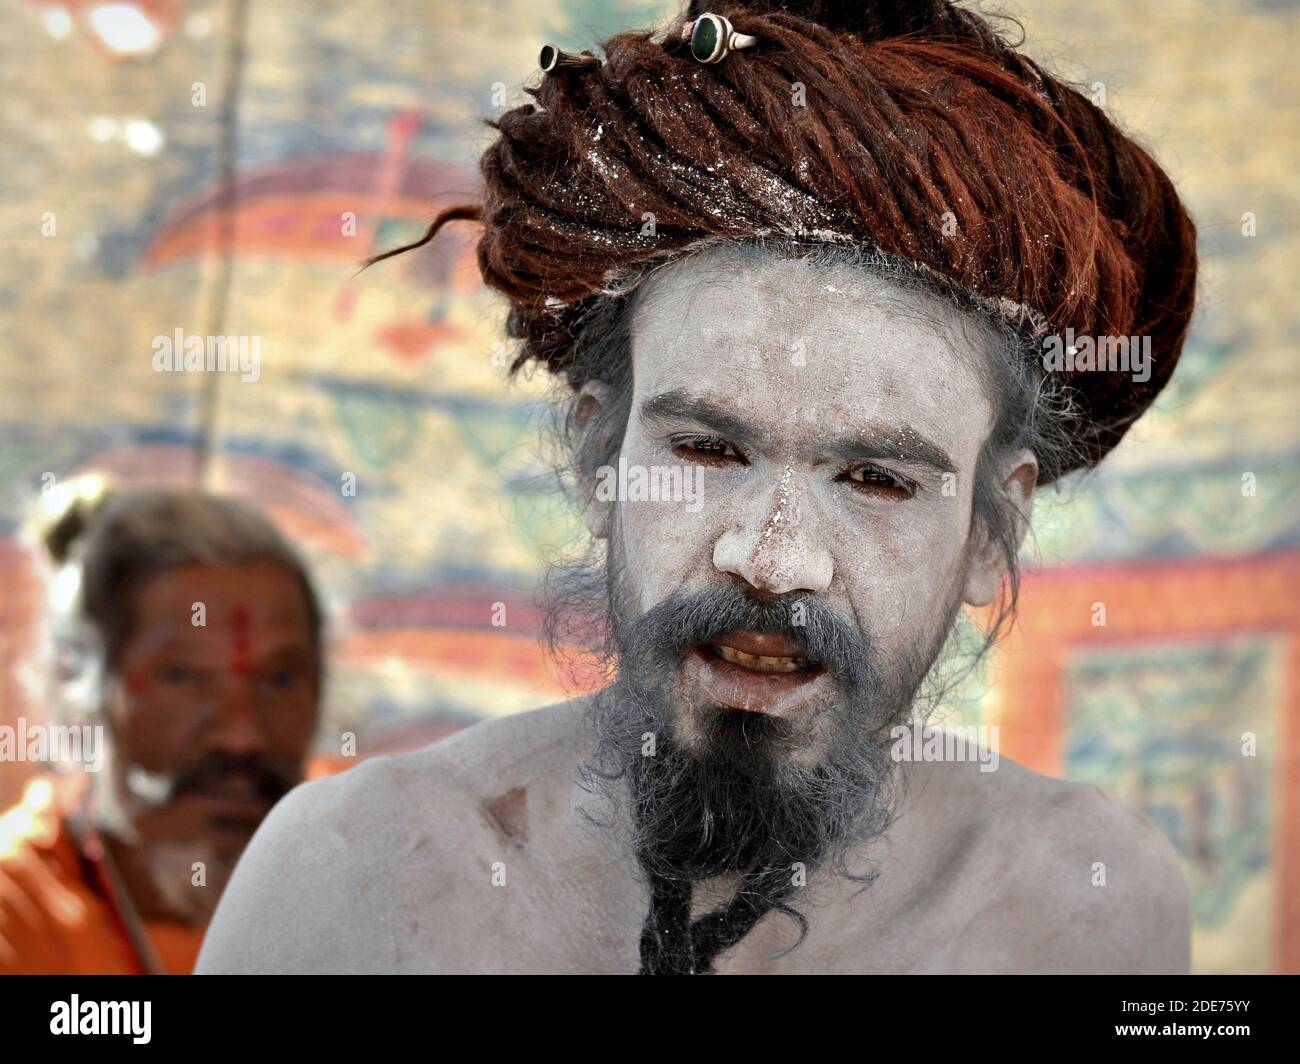 Indian Hindu Shaivite sadhu (baba, yogi) with dread bun and sacred white ash (vibhuti) all over his face, beard and upper body poses for the camera. Stock Photo